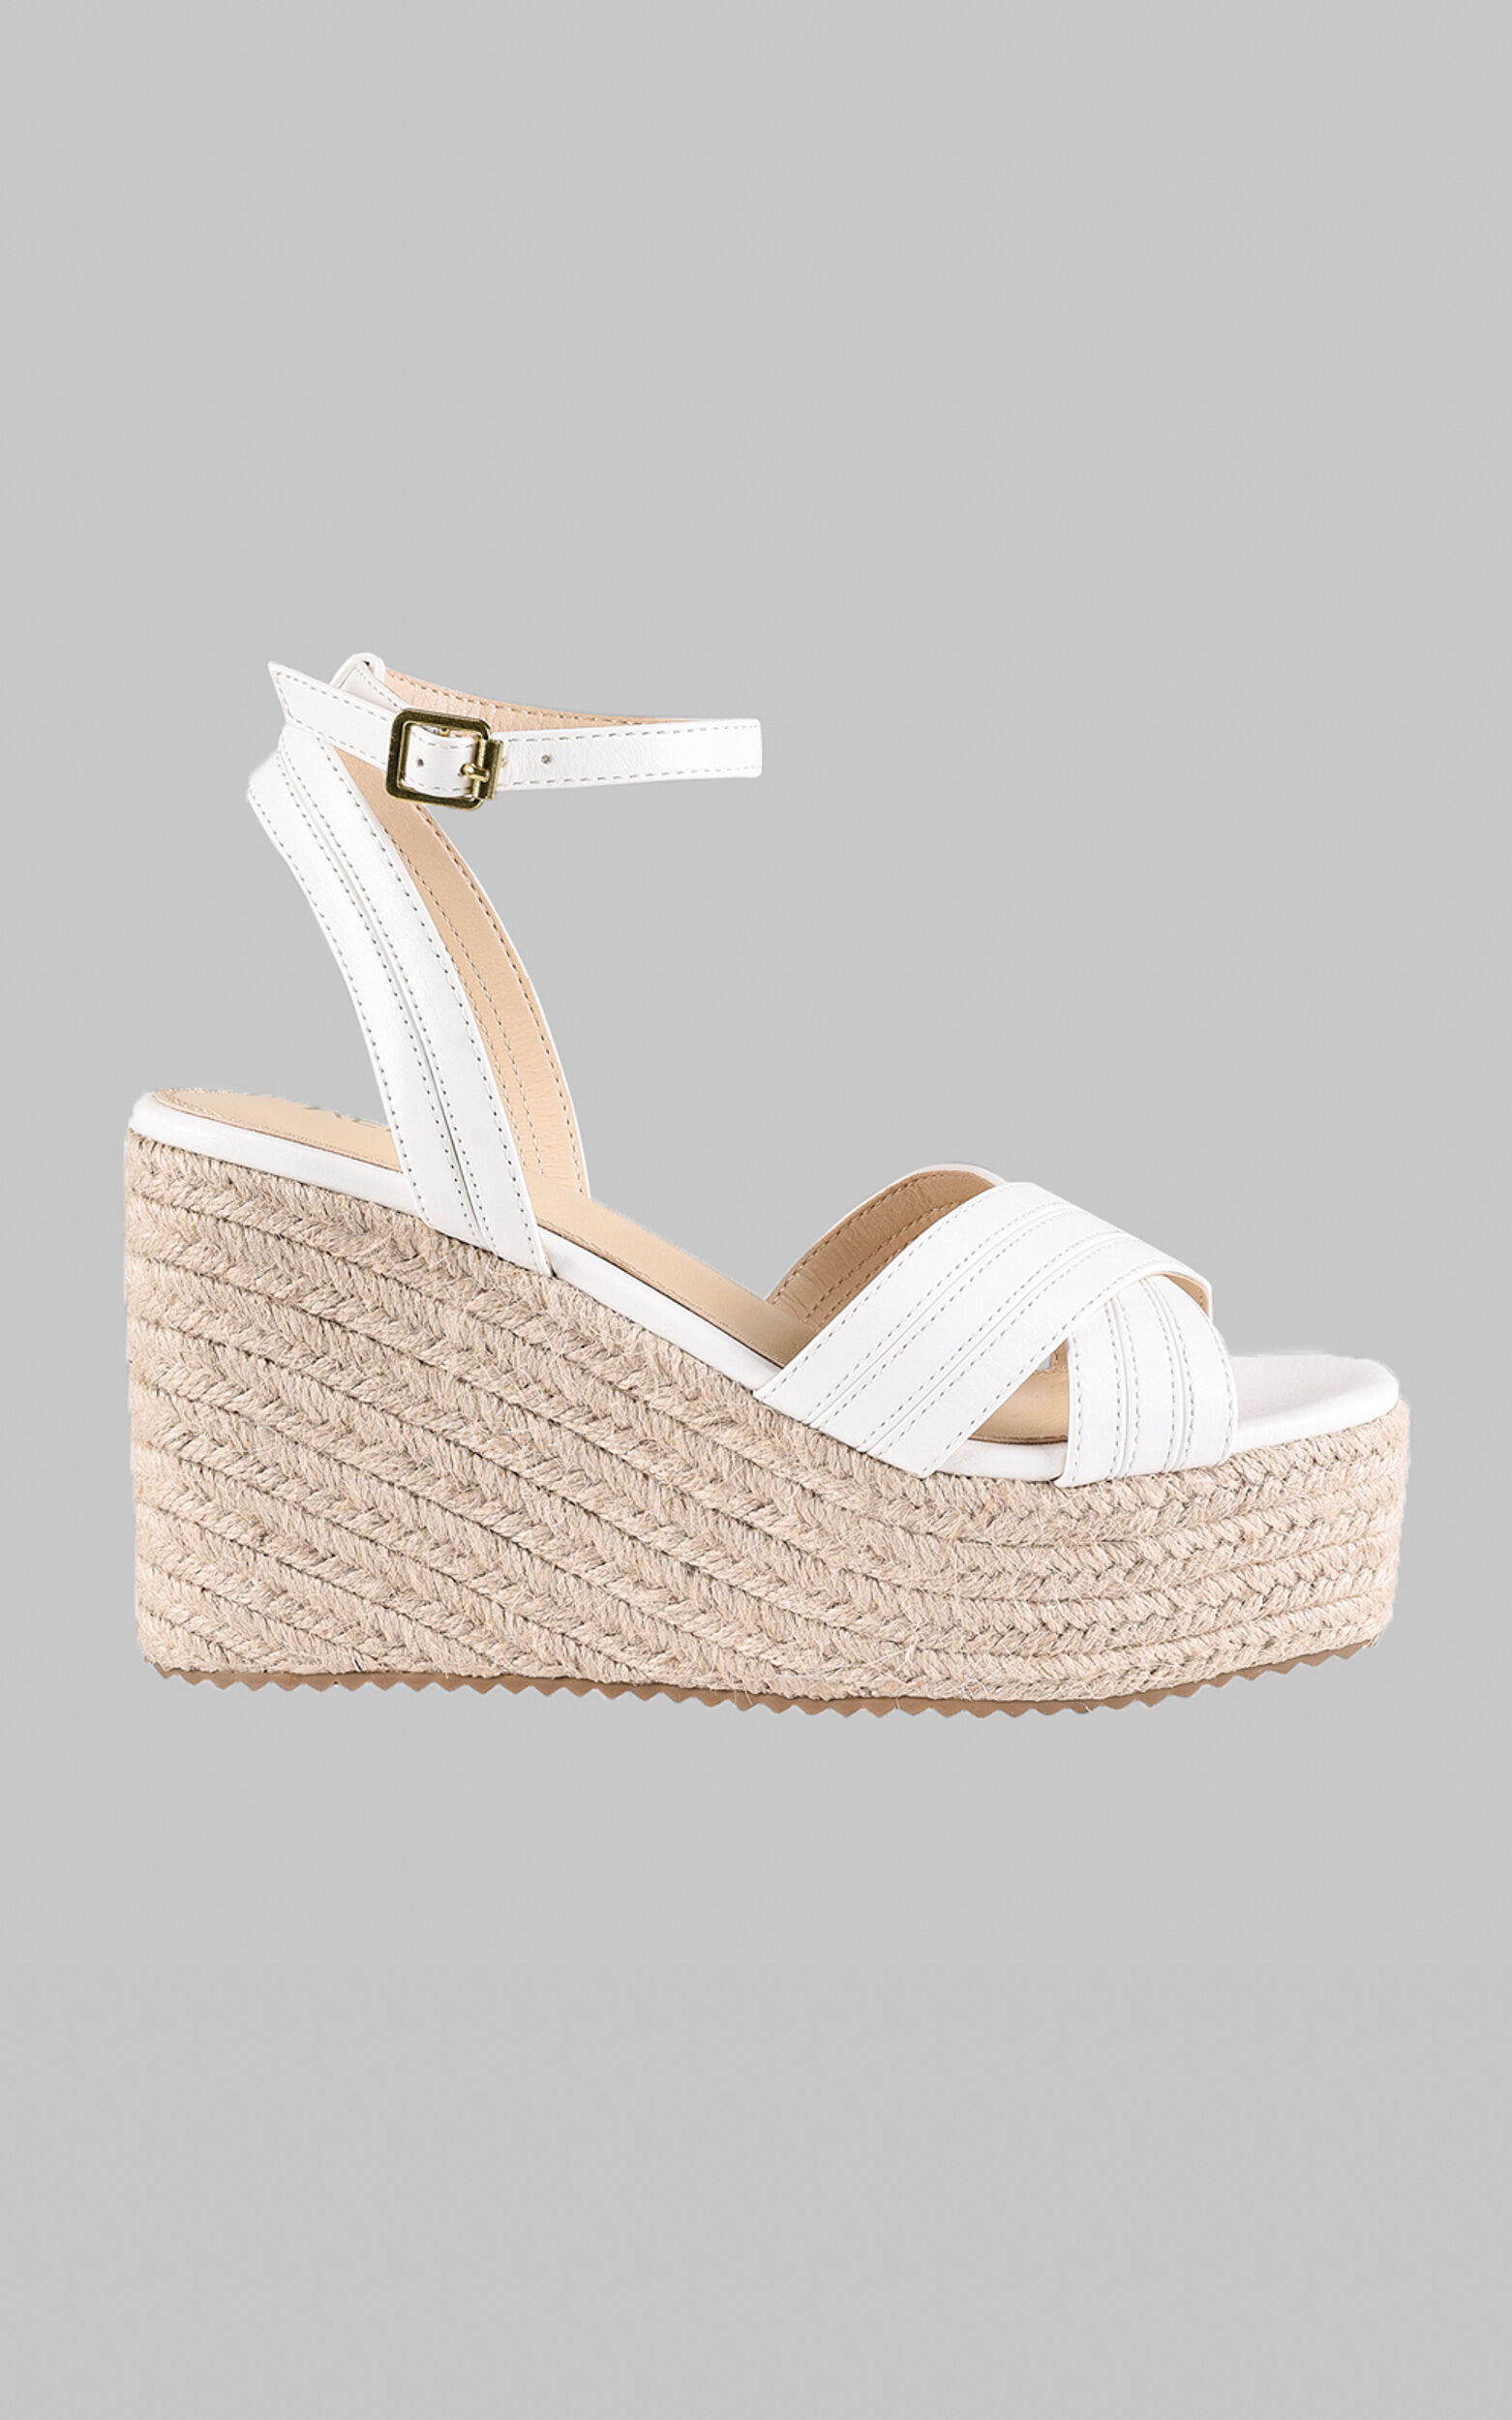 Verali - Callie Wedges in White Softee - 05, WHT1, super-hi-res image number null